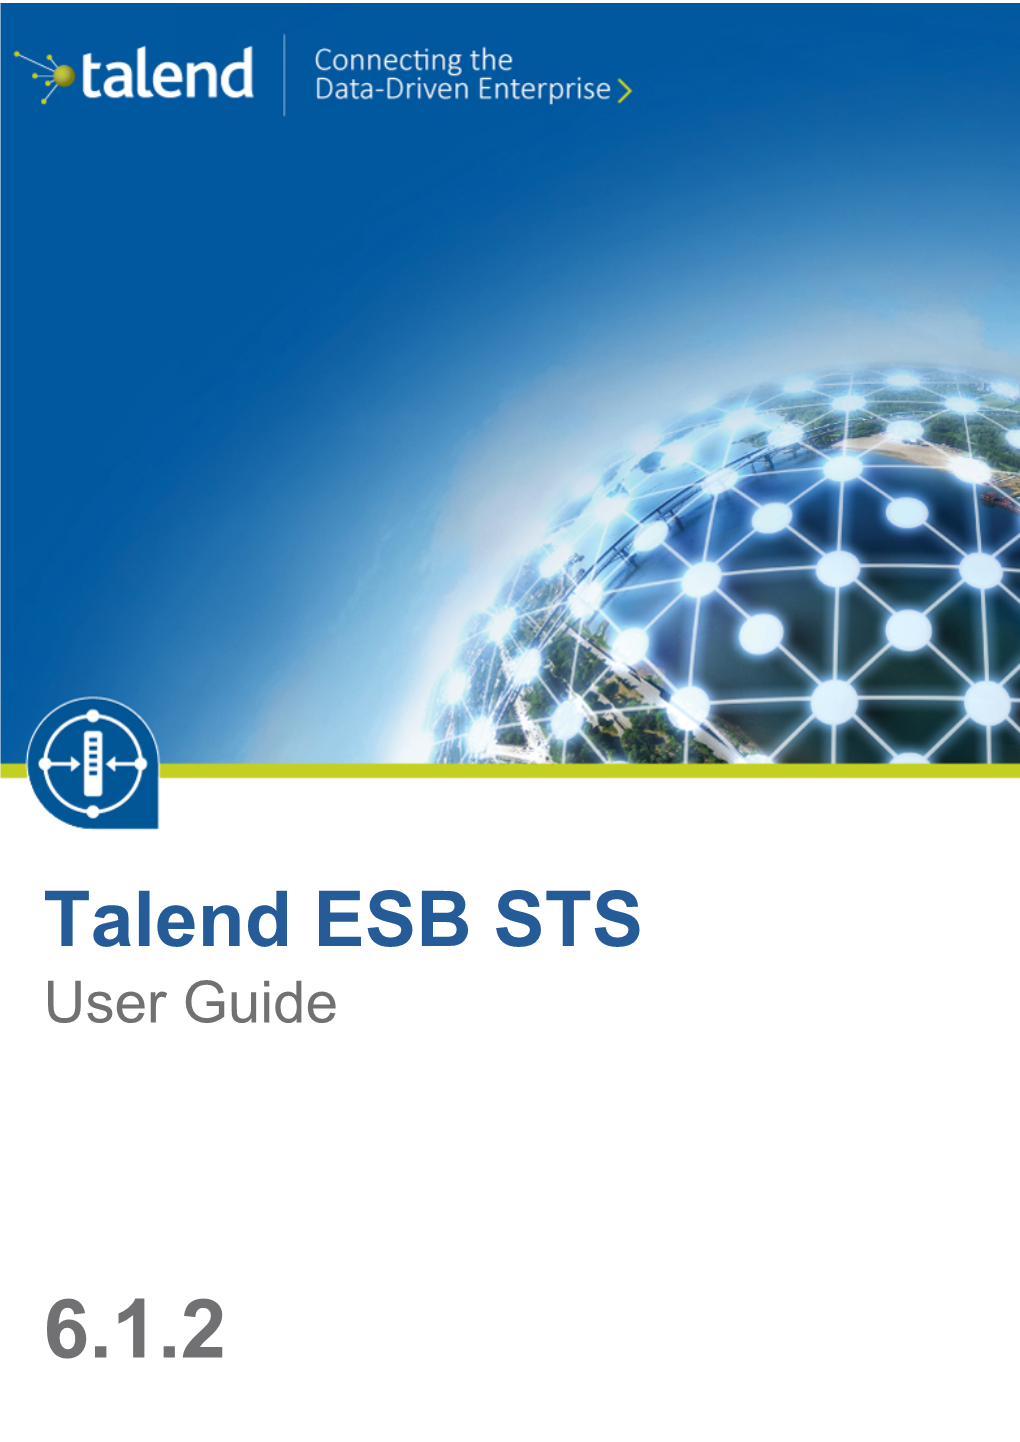 Talend ESB STS User Guide